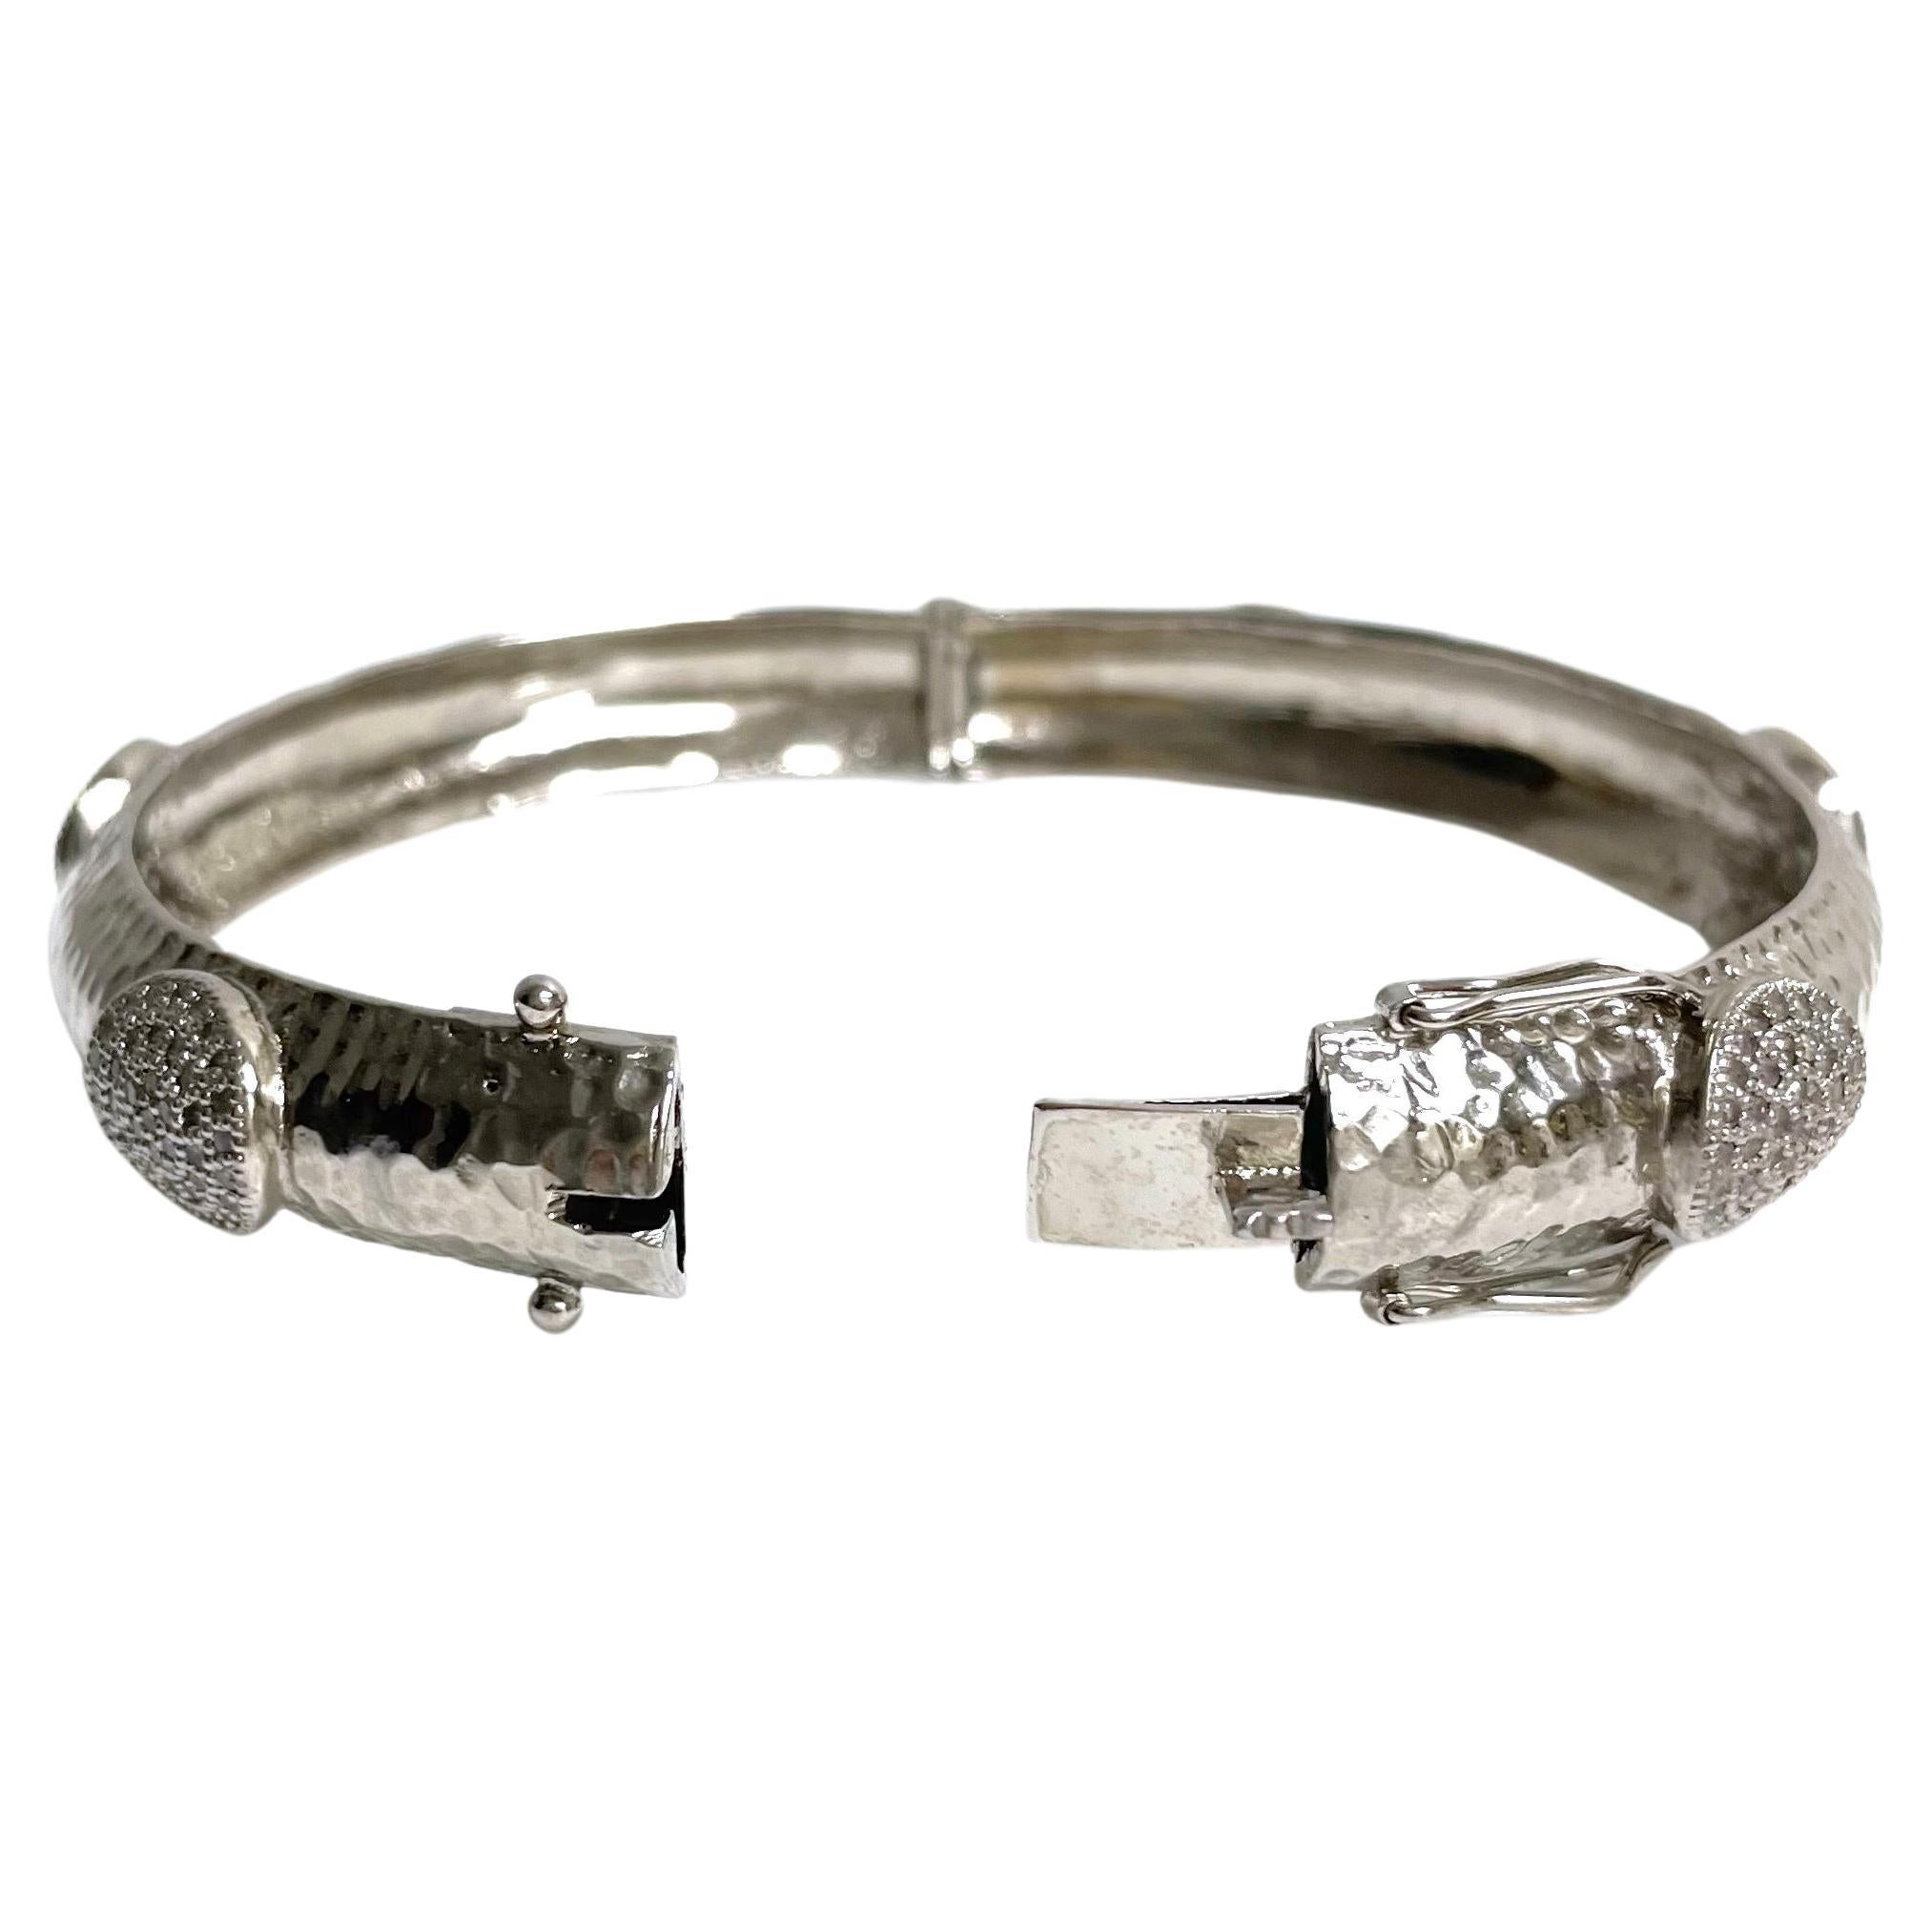  Hammered Rhodium-Plated Silver Bangle with Diamonds Paradizia Bracelet In New Condition For Sale In Laguna Beach, CA